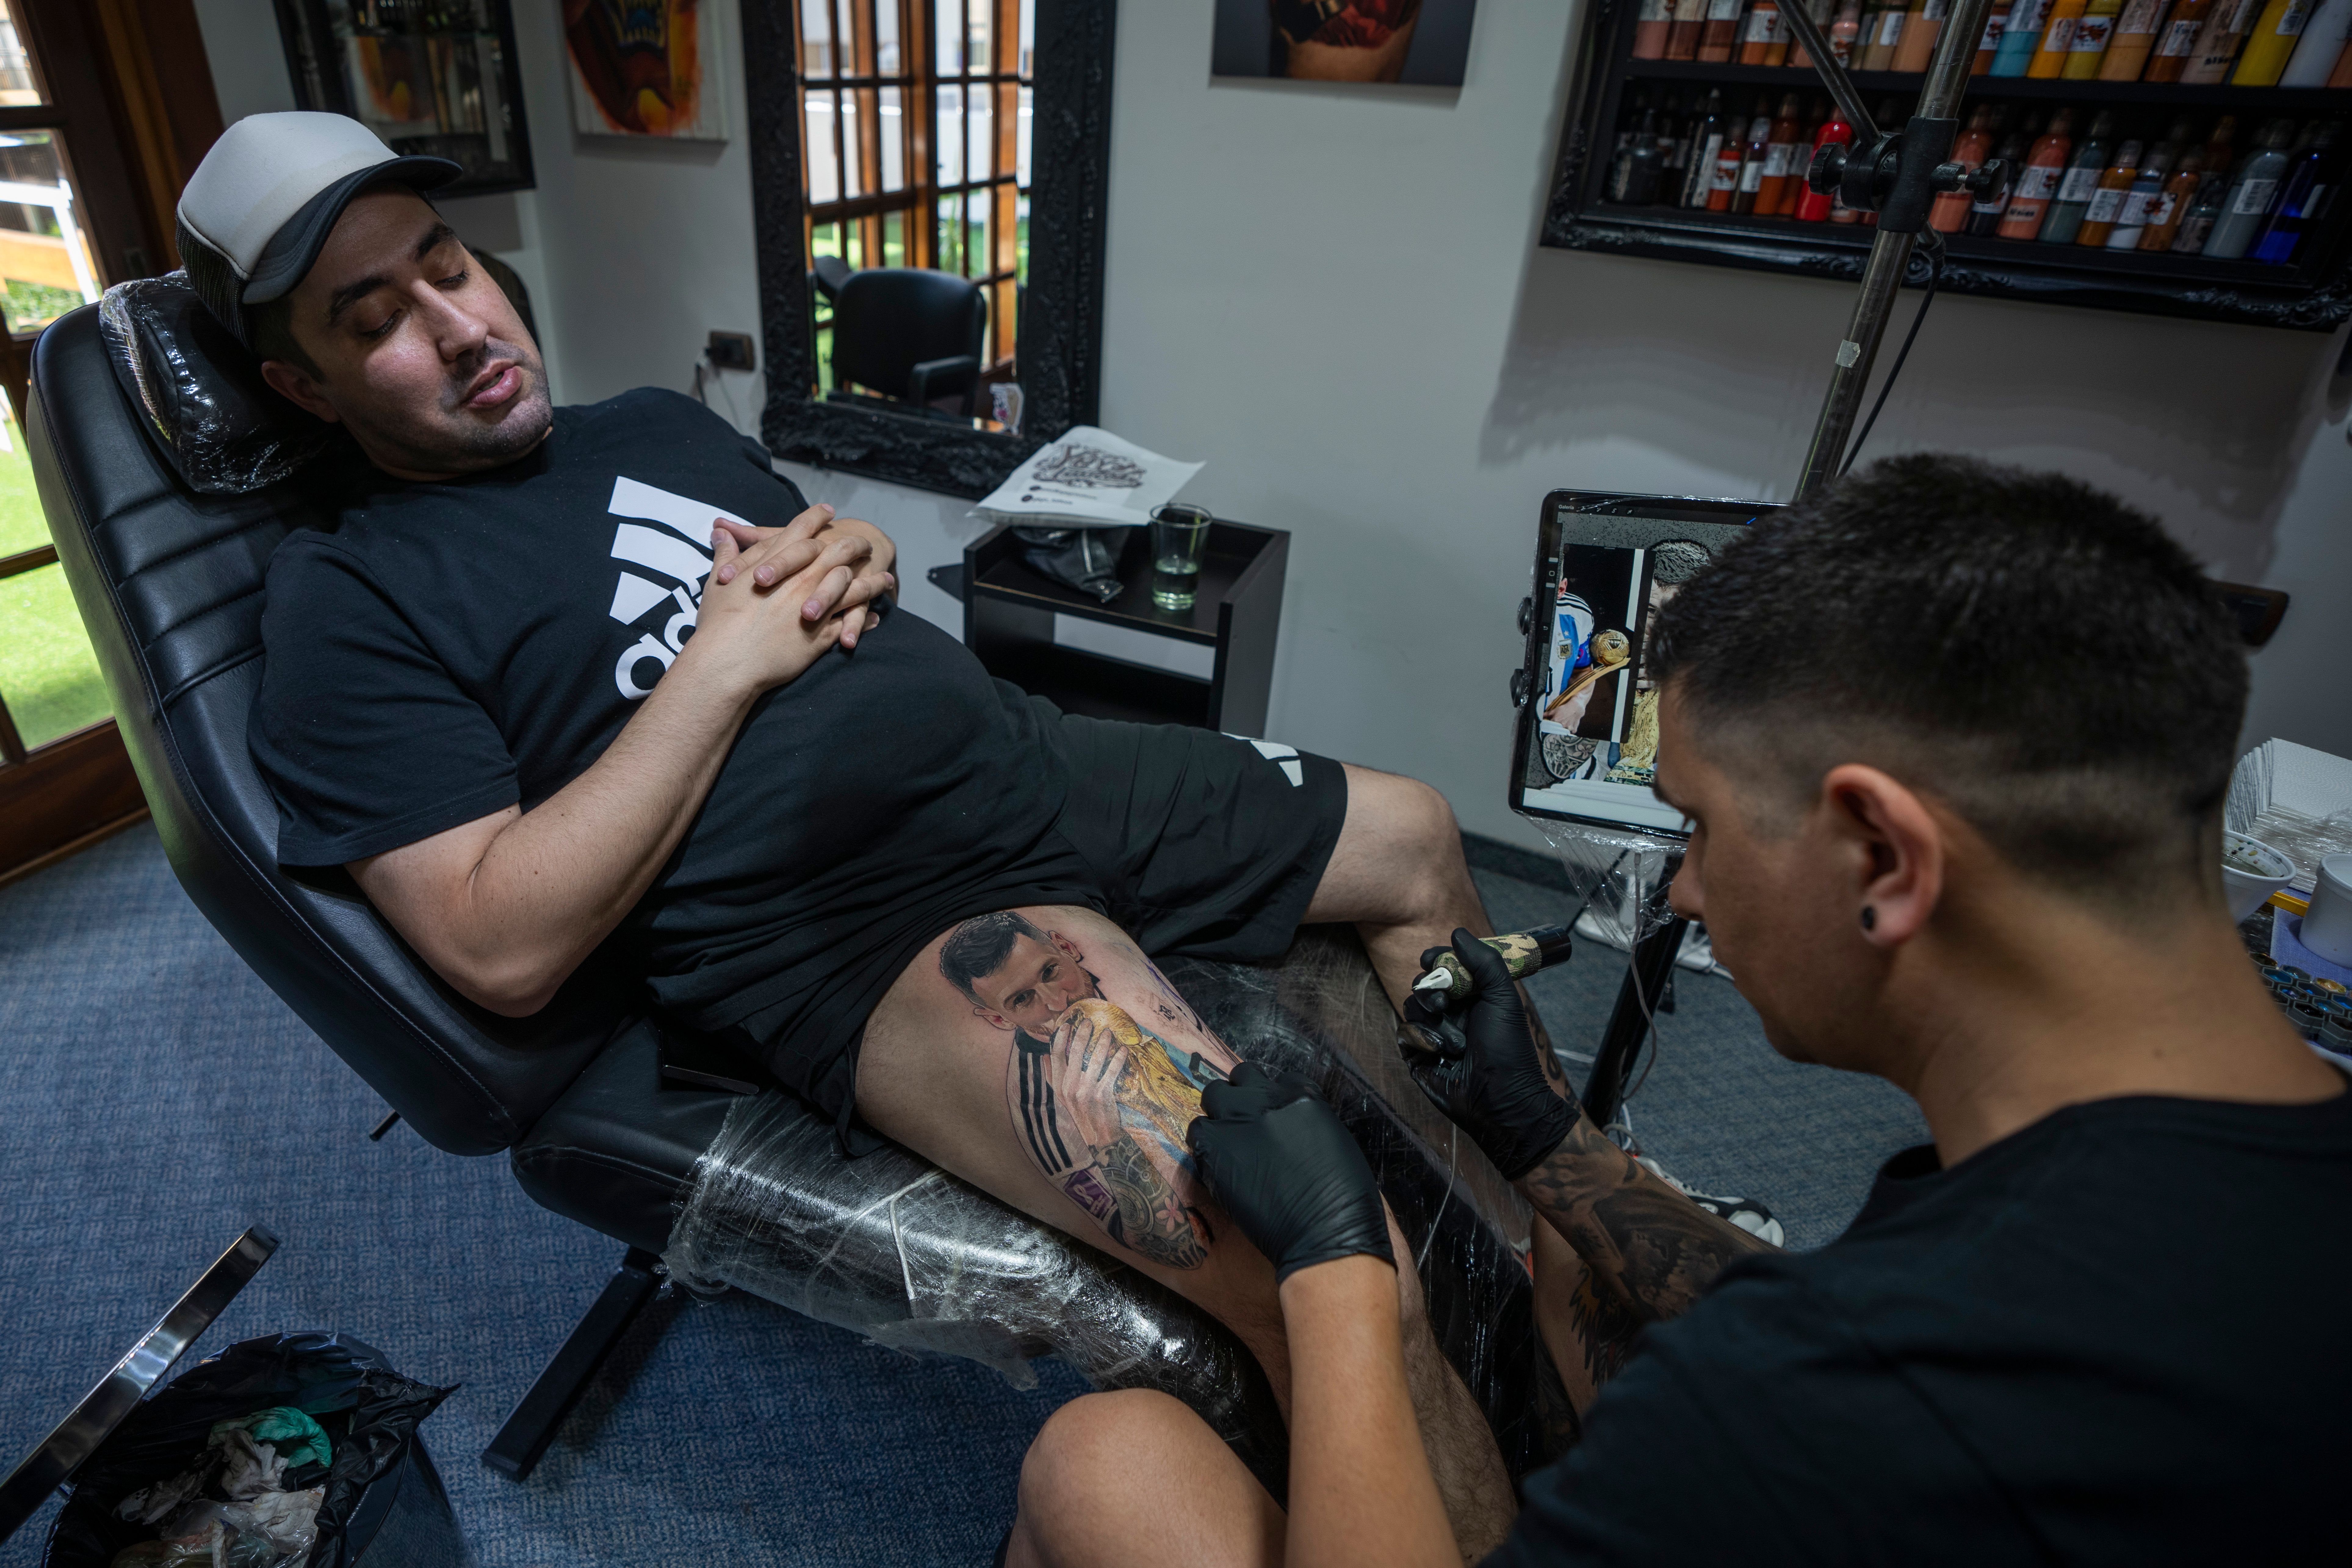 Argentines have tattoo fever following World Cup triumph  Sports   stardemcom